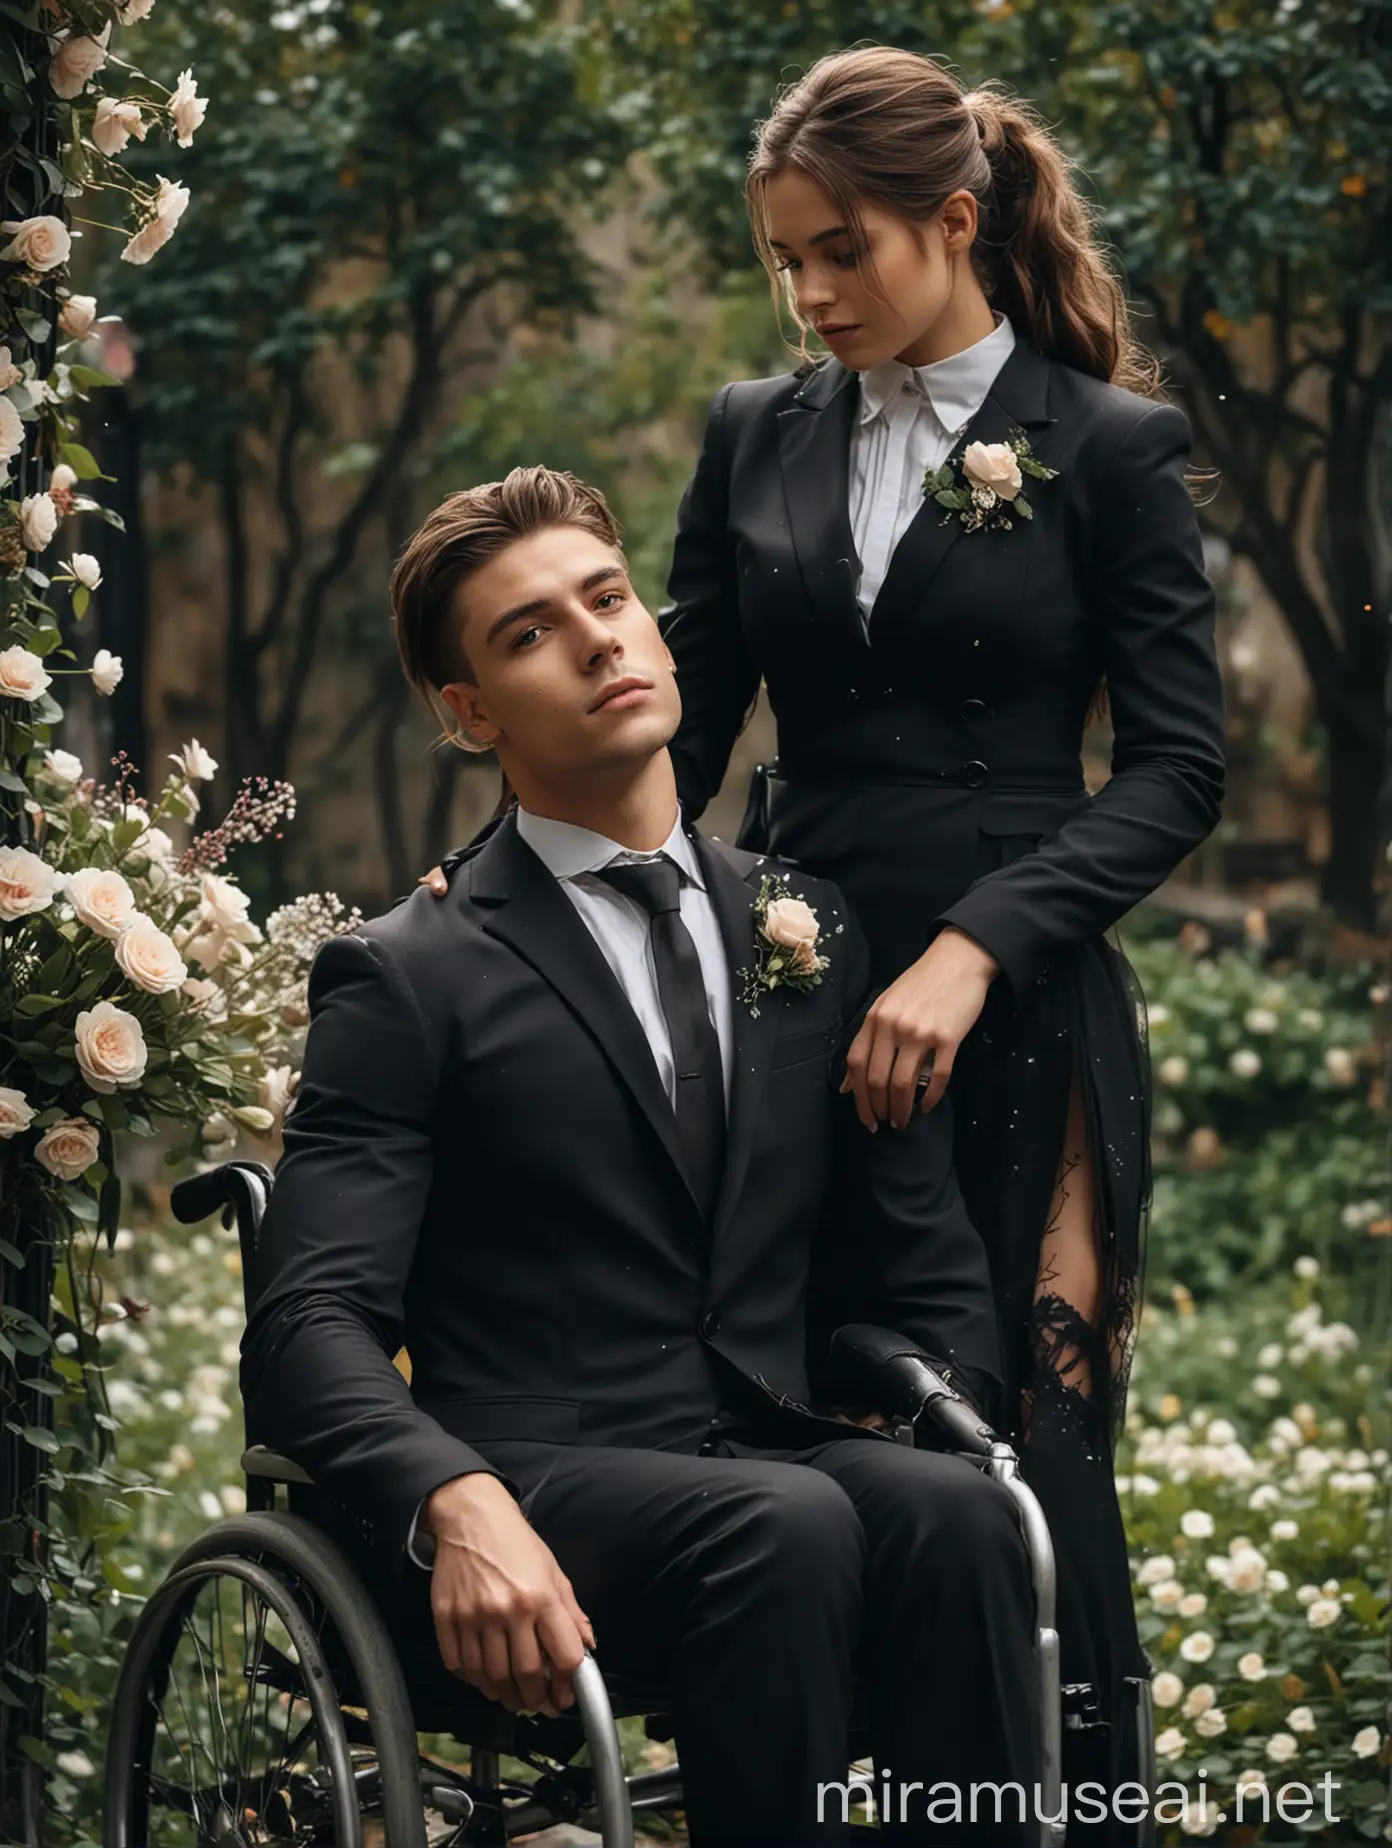 Elegant Woman Embracing Muscular Man in Wheelchair with Falling Flowers